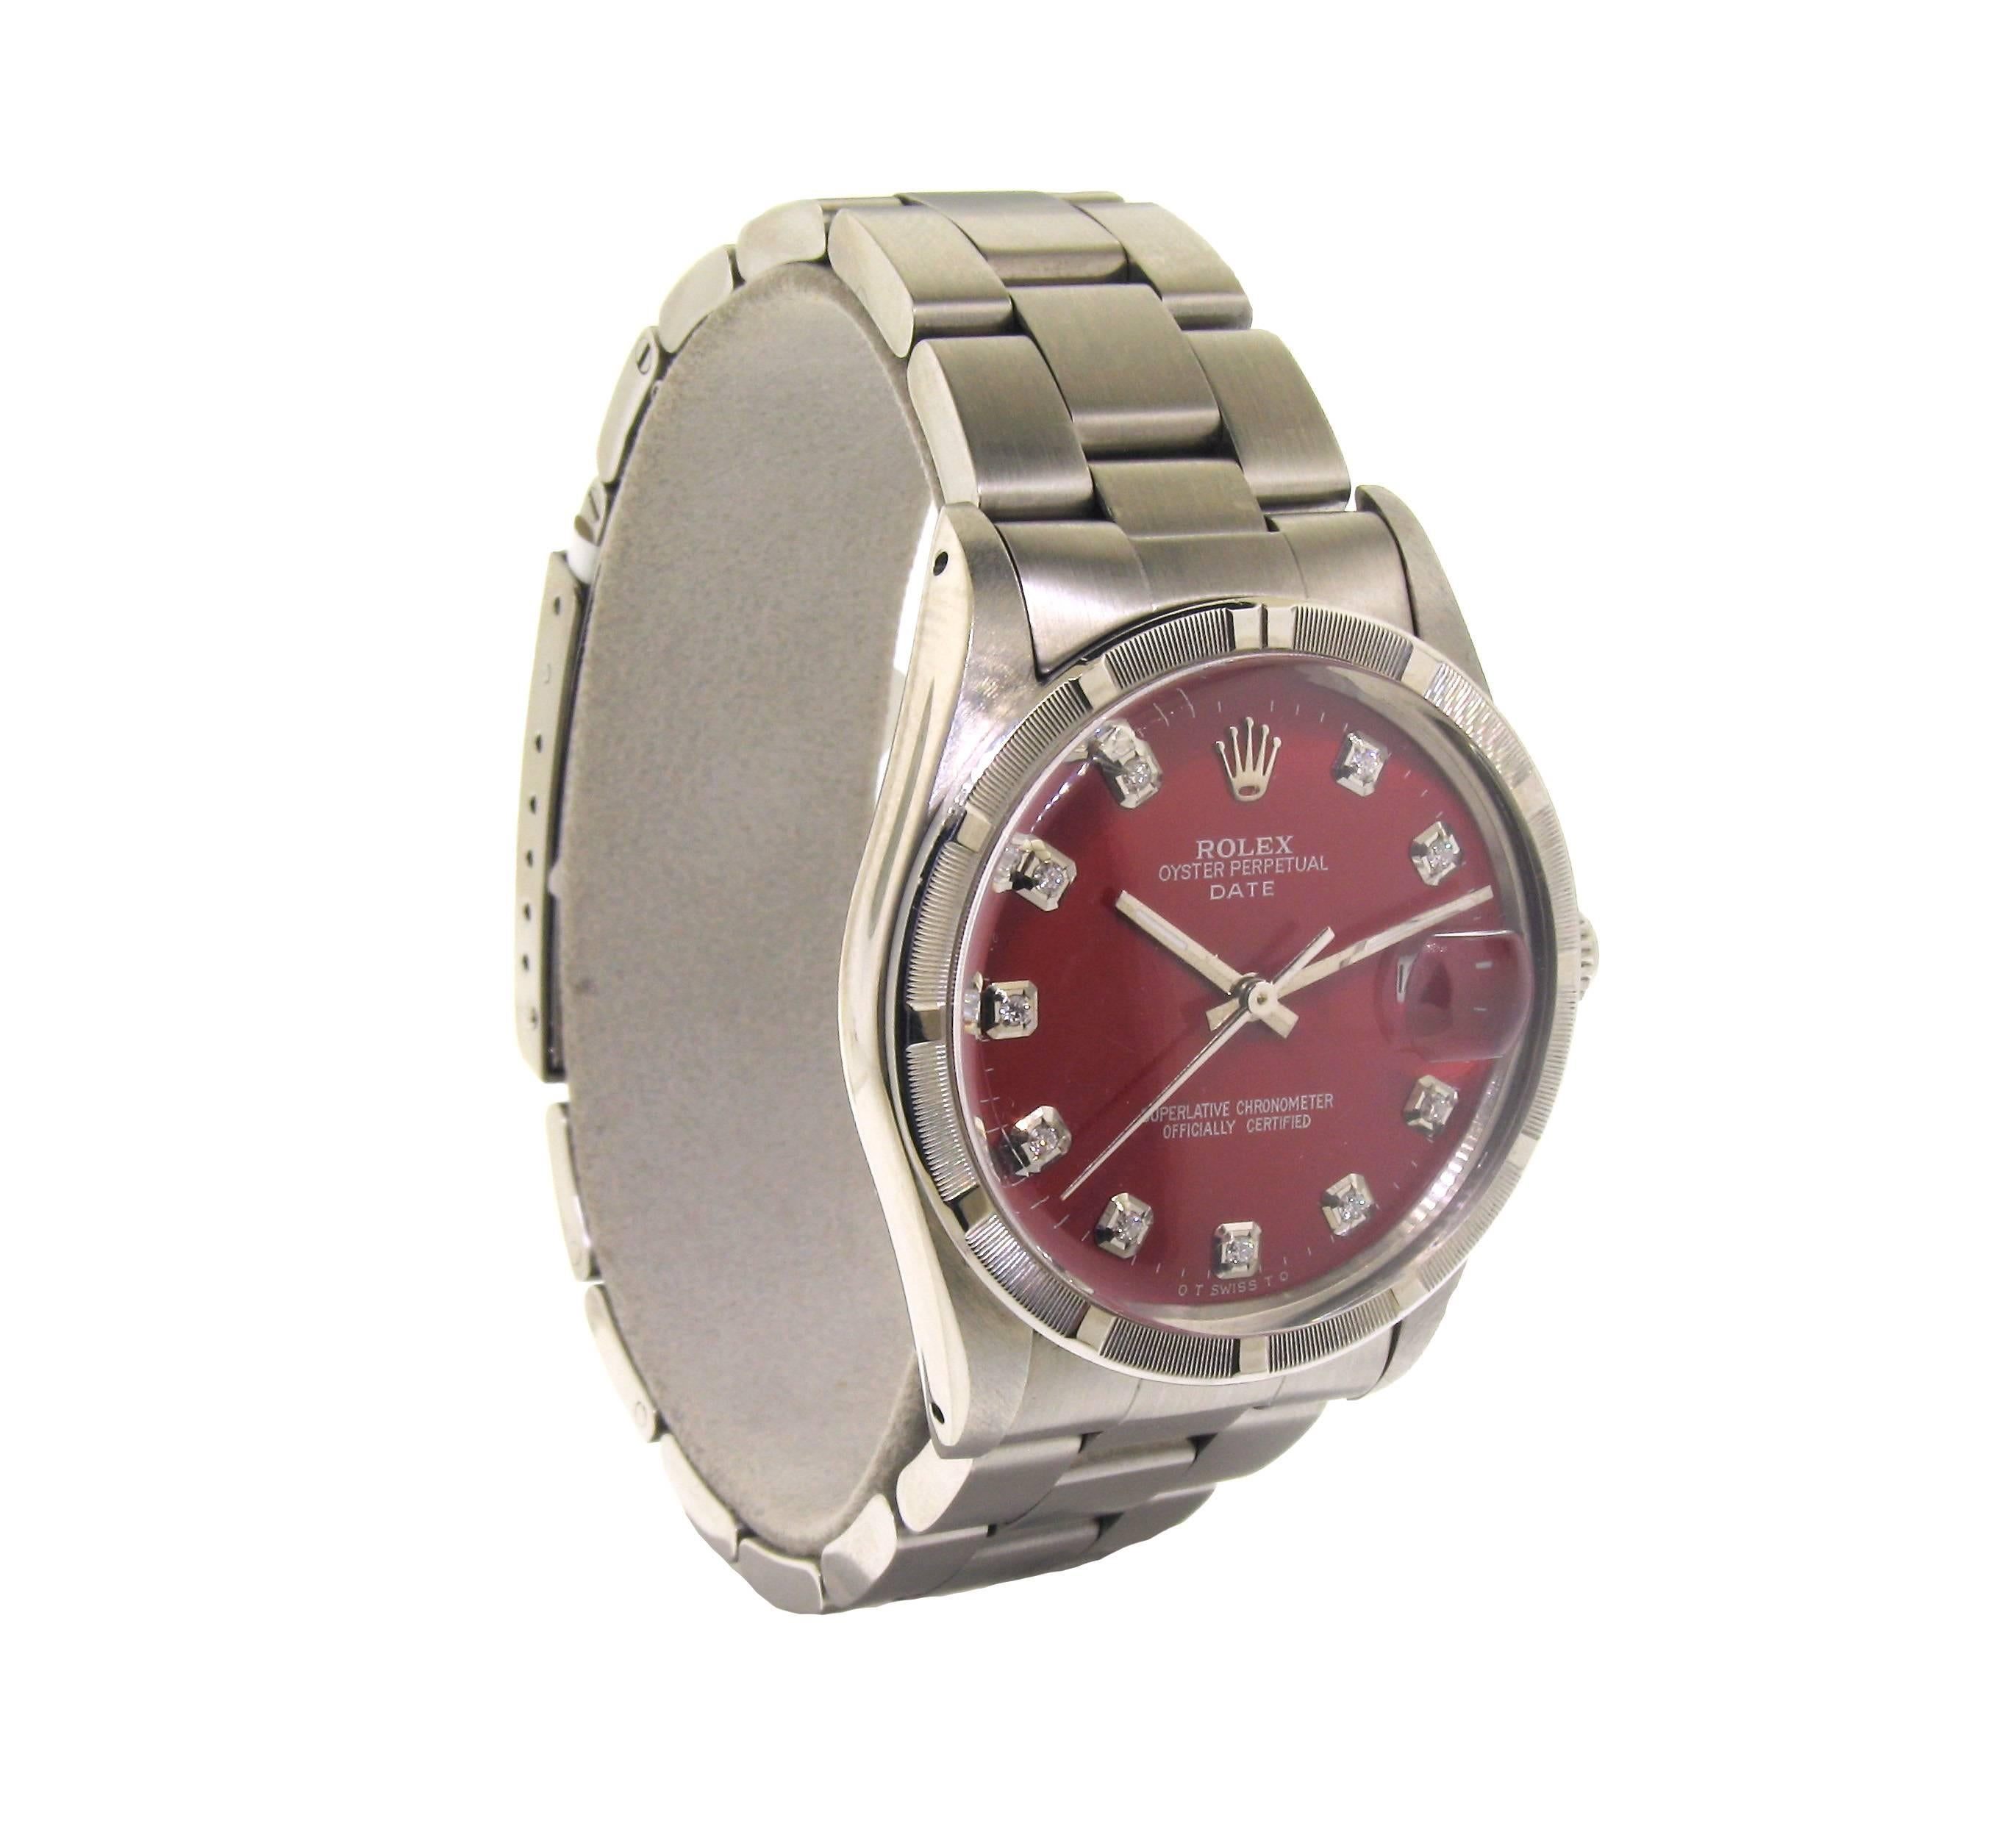 FACTORY / HOUSE: Rolex Watch Company
STYLE / REFERENCE: Oyster Perpetual Date / Reference 5500
METAL: Stainless Steel 
CIRCA: 1970's
MOVEMENT / CALIBER: Perpetual Winding / 27 Jewels 
DIAL / HANDS: Custom Red Dial with Diamond Markers / Silver Baton